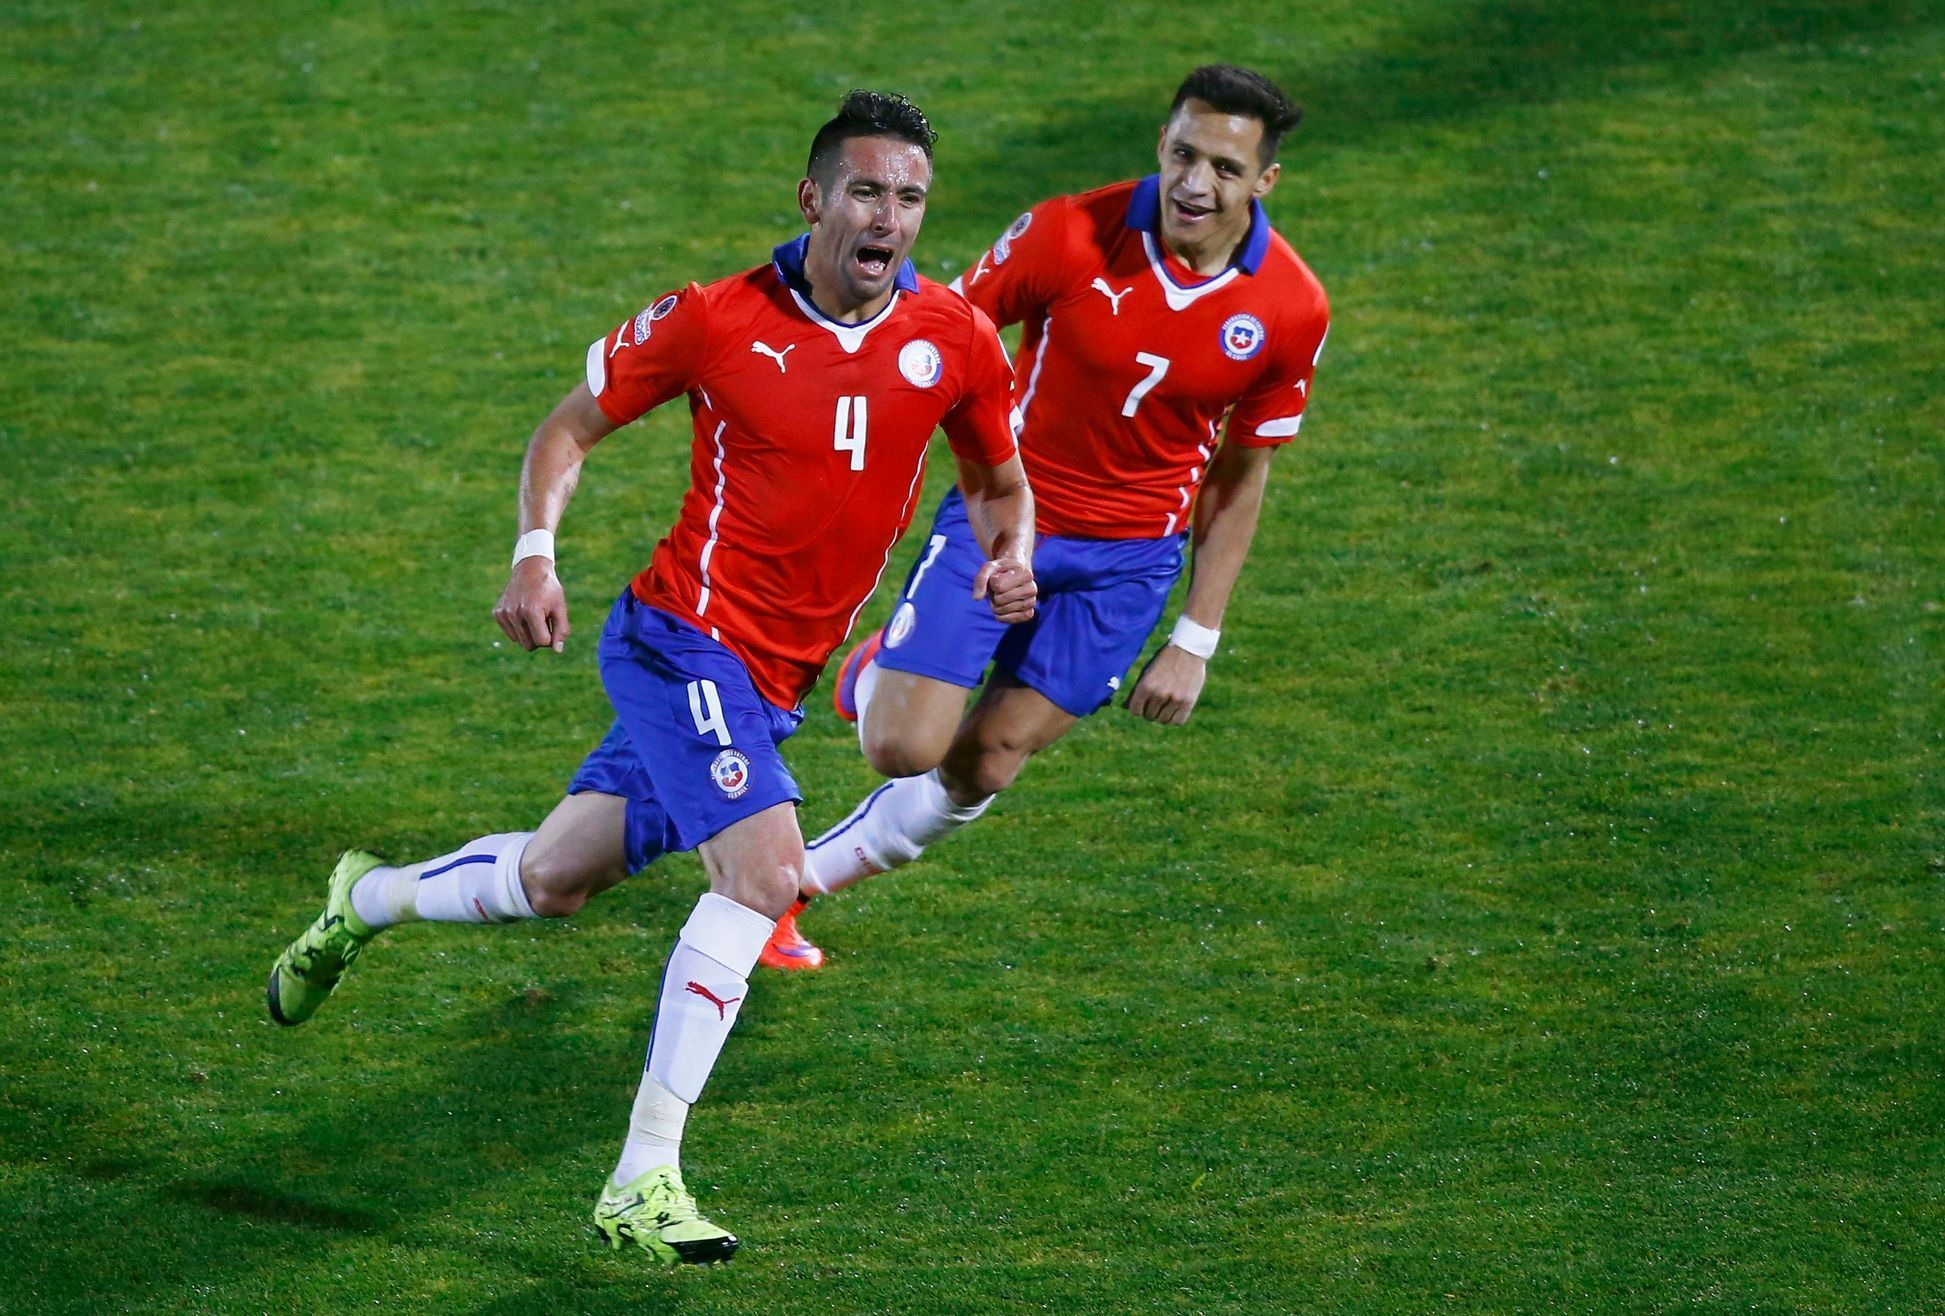 Chile's Isla celerates his goal with teammate Sanchez during their quarter-finals Copa America 2015 soccer match against Uruguay at the National Stadium in Santiago